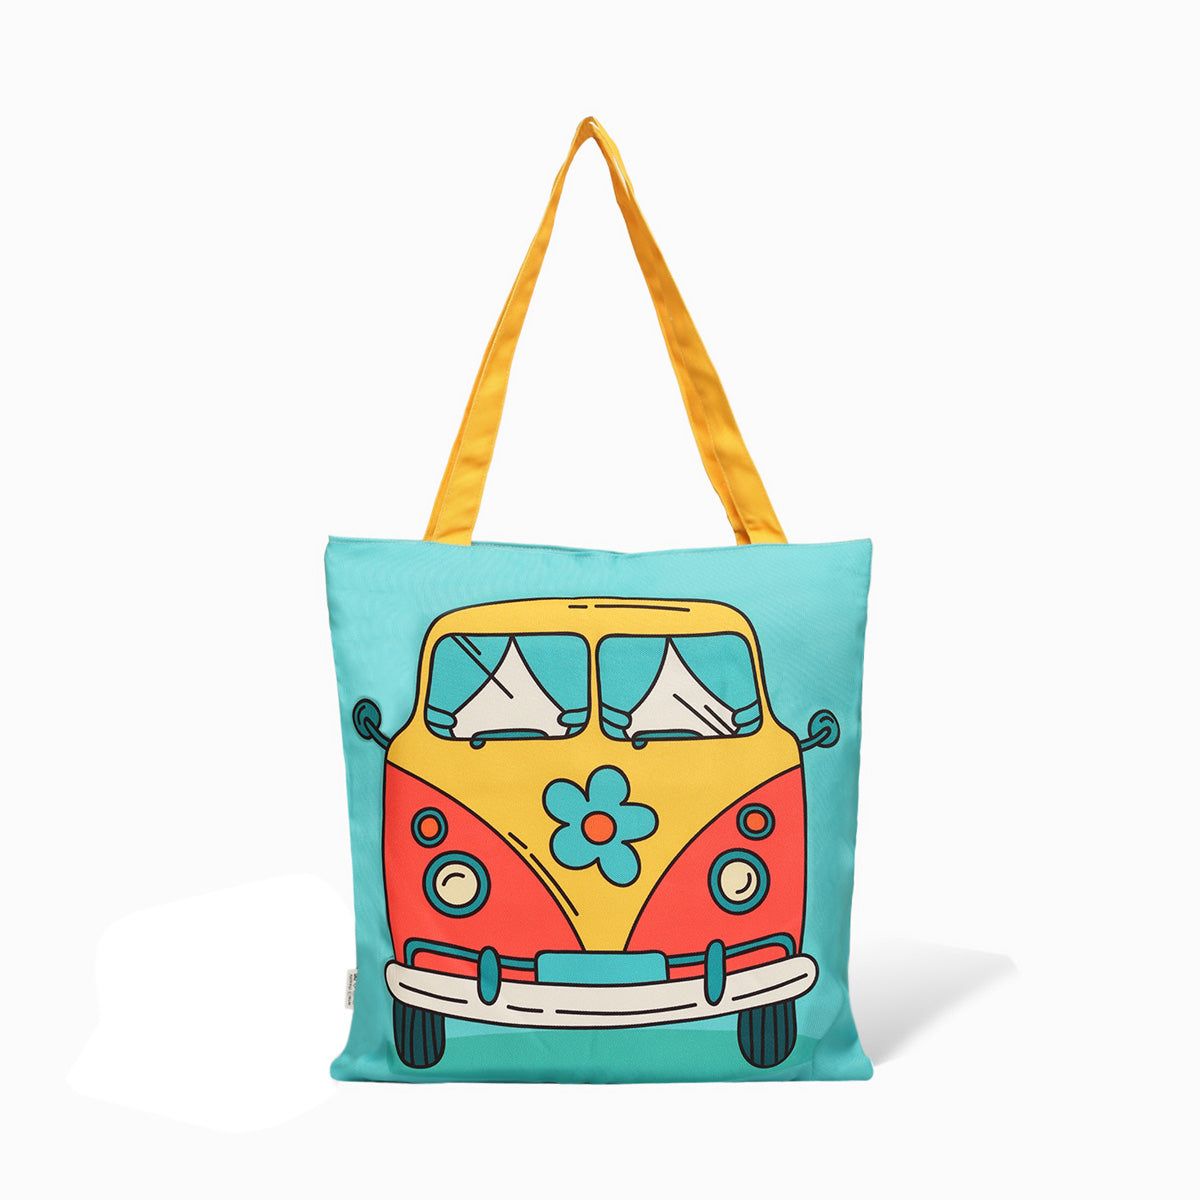 Fun tote bag with whimsical van illustration, great for adding a playful touch to your look.